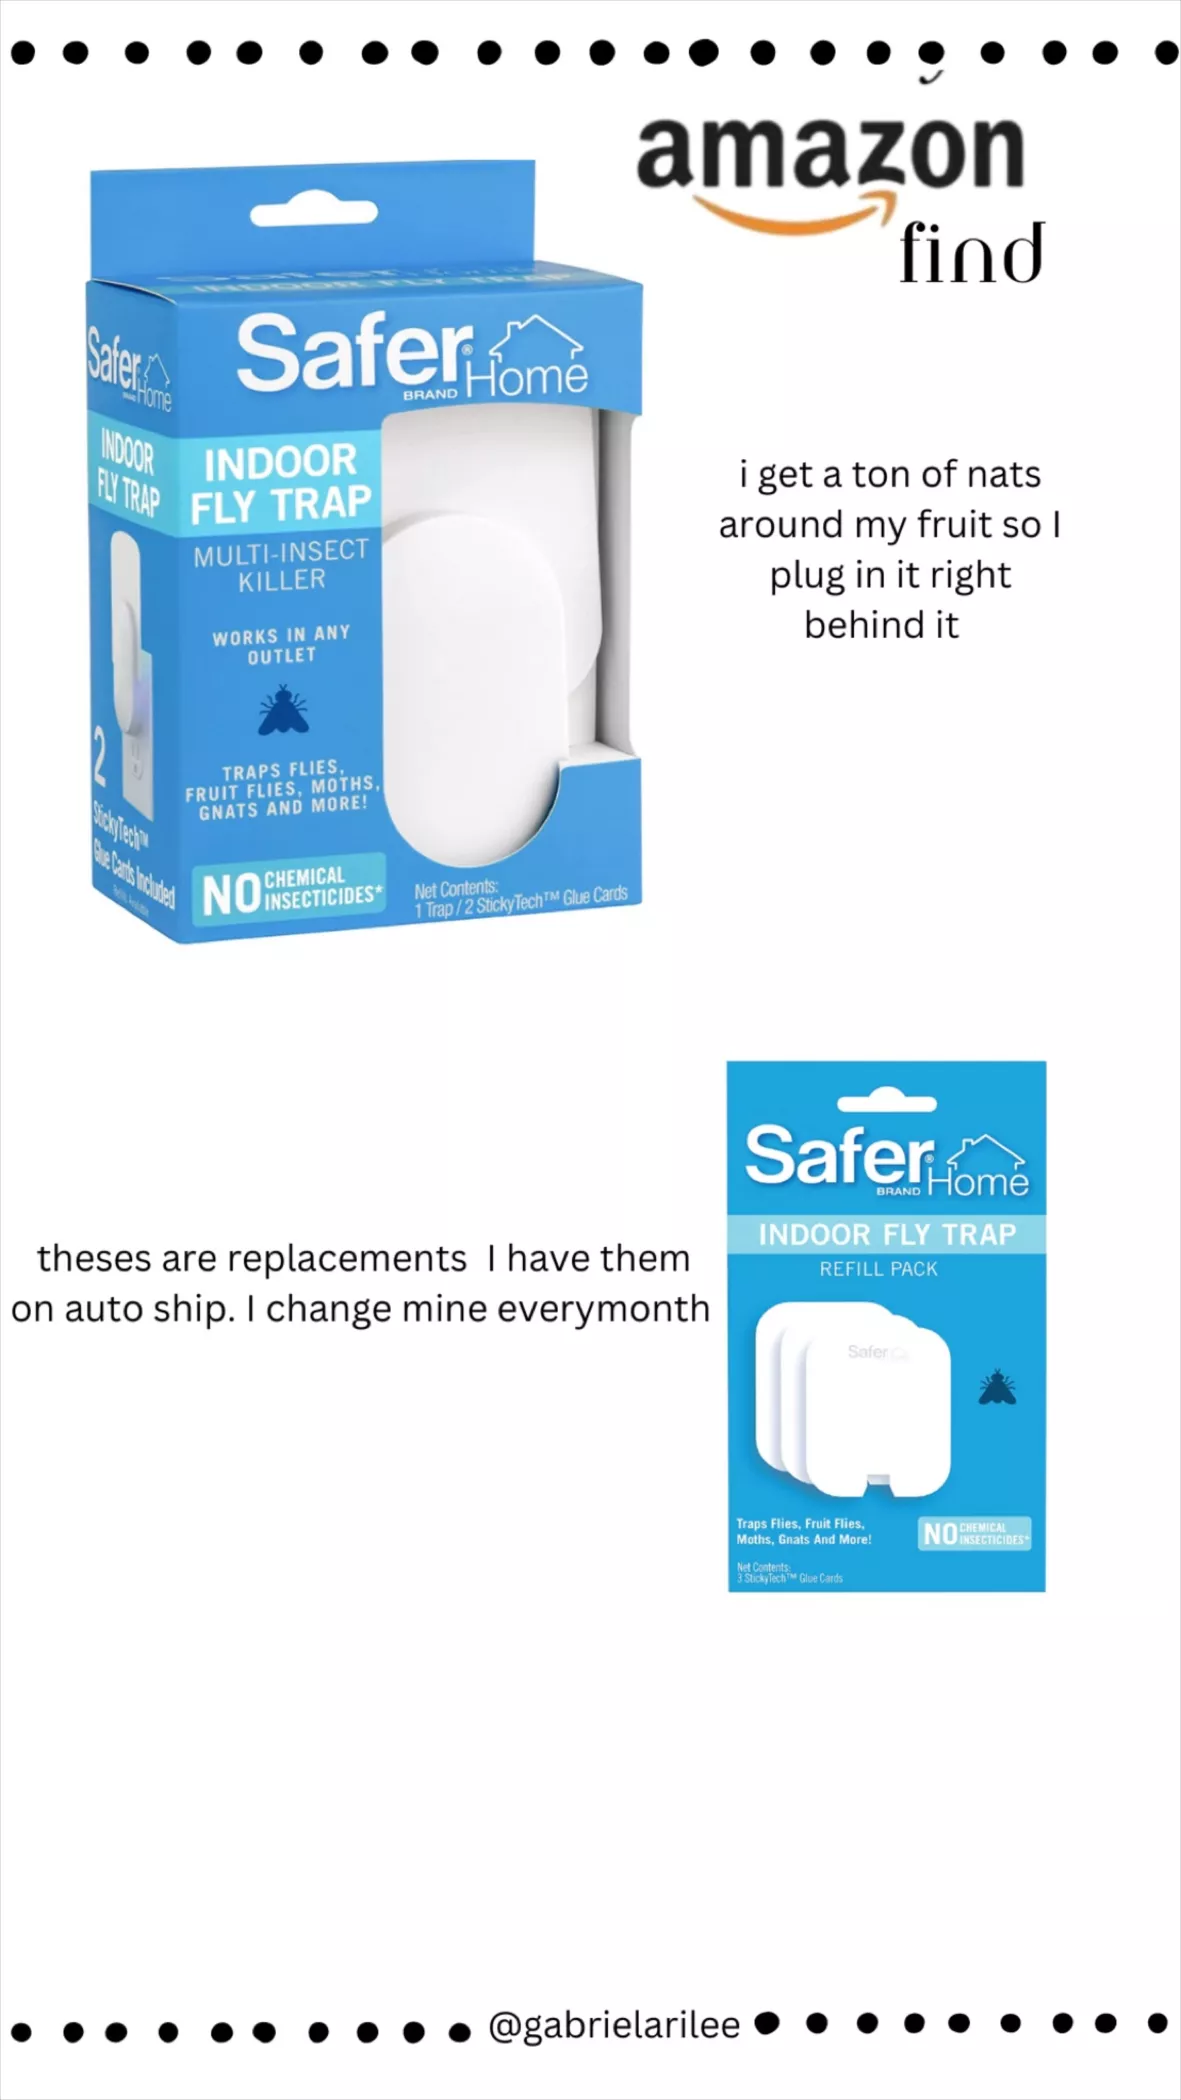 Safer Home Indoor Plug-In Fly Trap